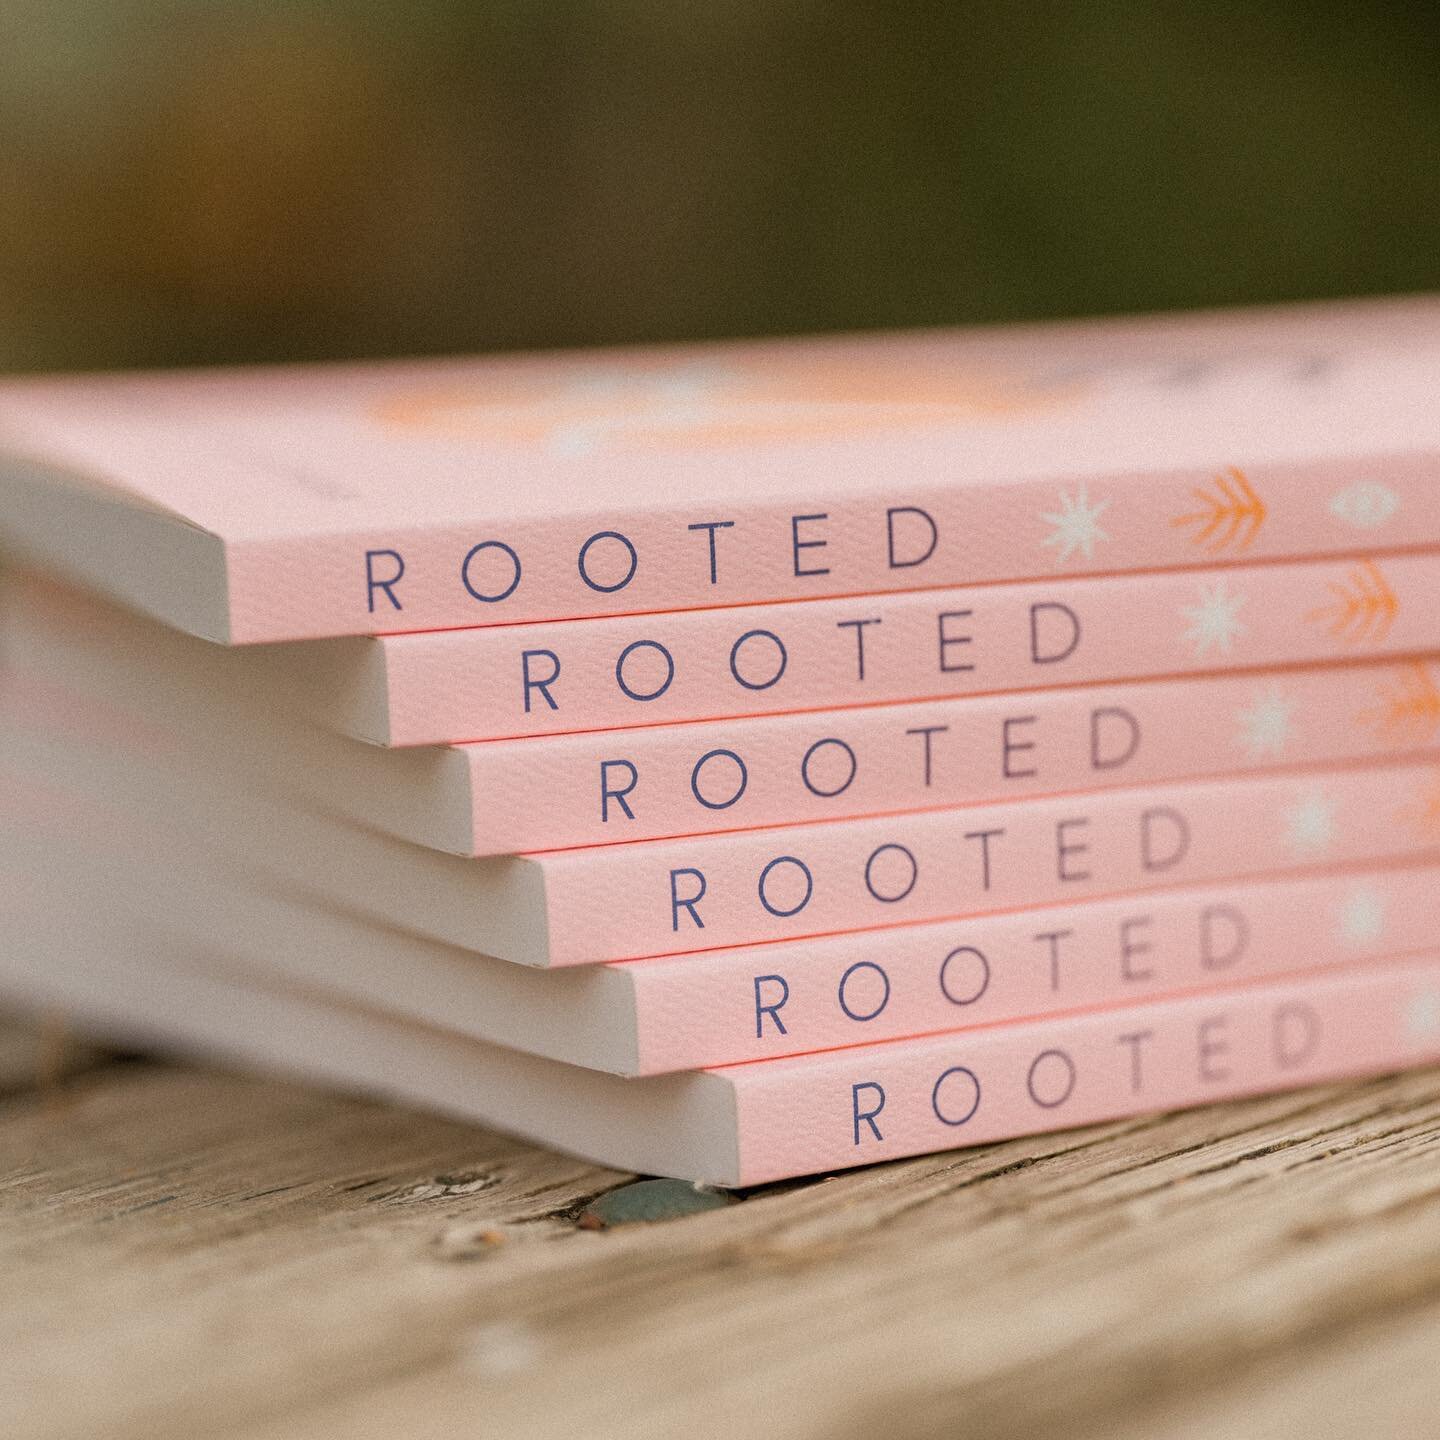 Still need a copy of @rootedmotherjournal? Get on the waitlist for our second print run and be alerted as soon as they&rsquo;re ready. More details in our stories✨